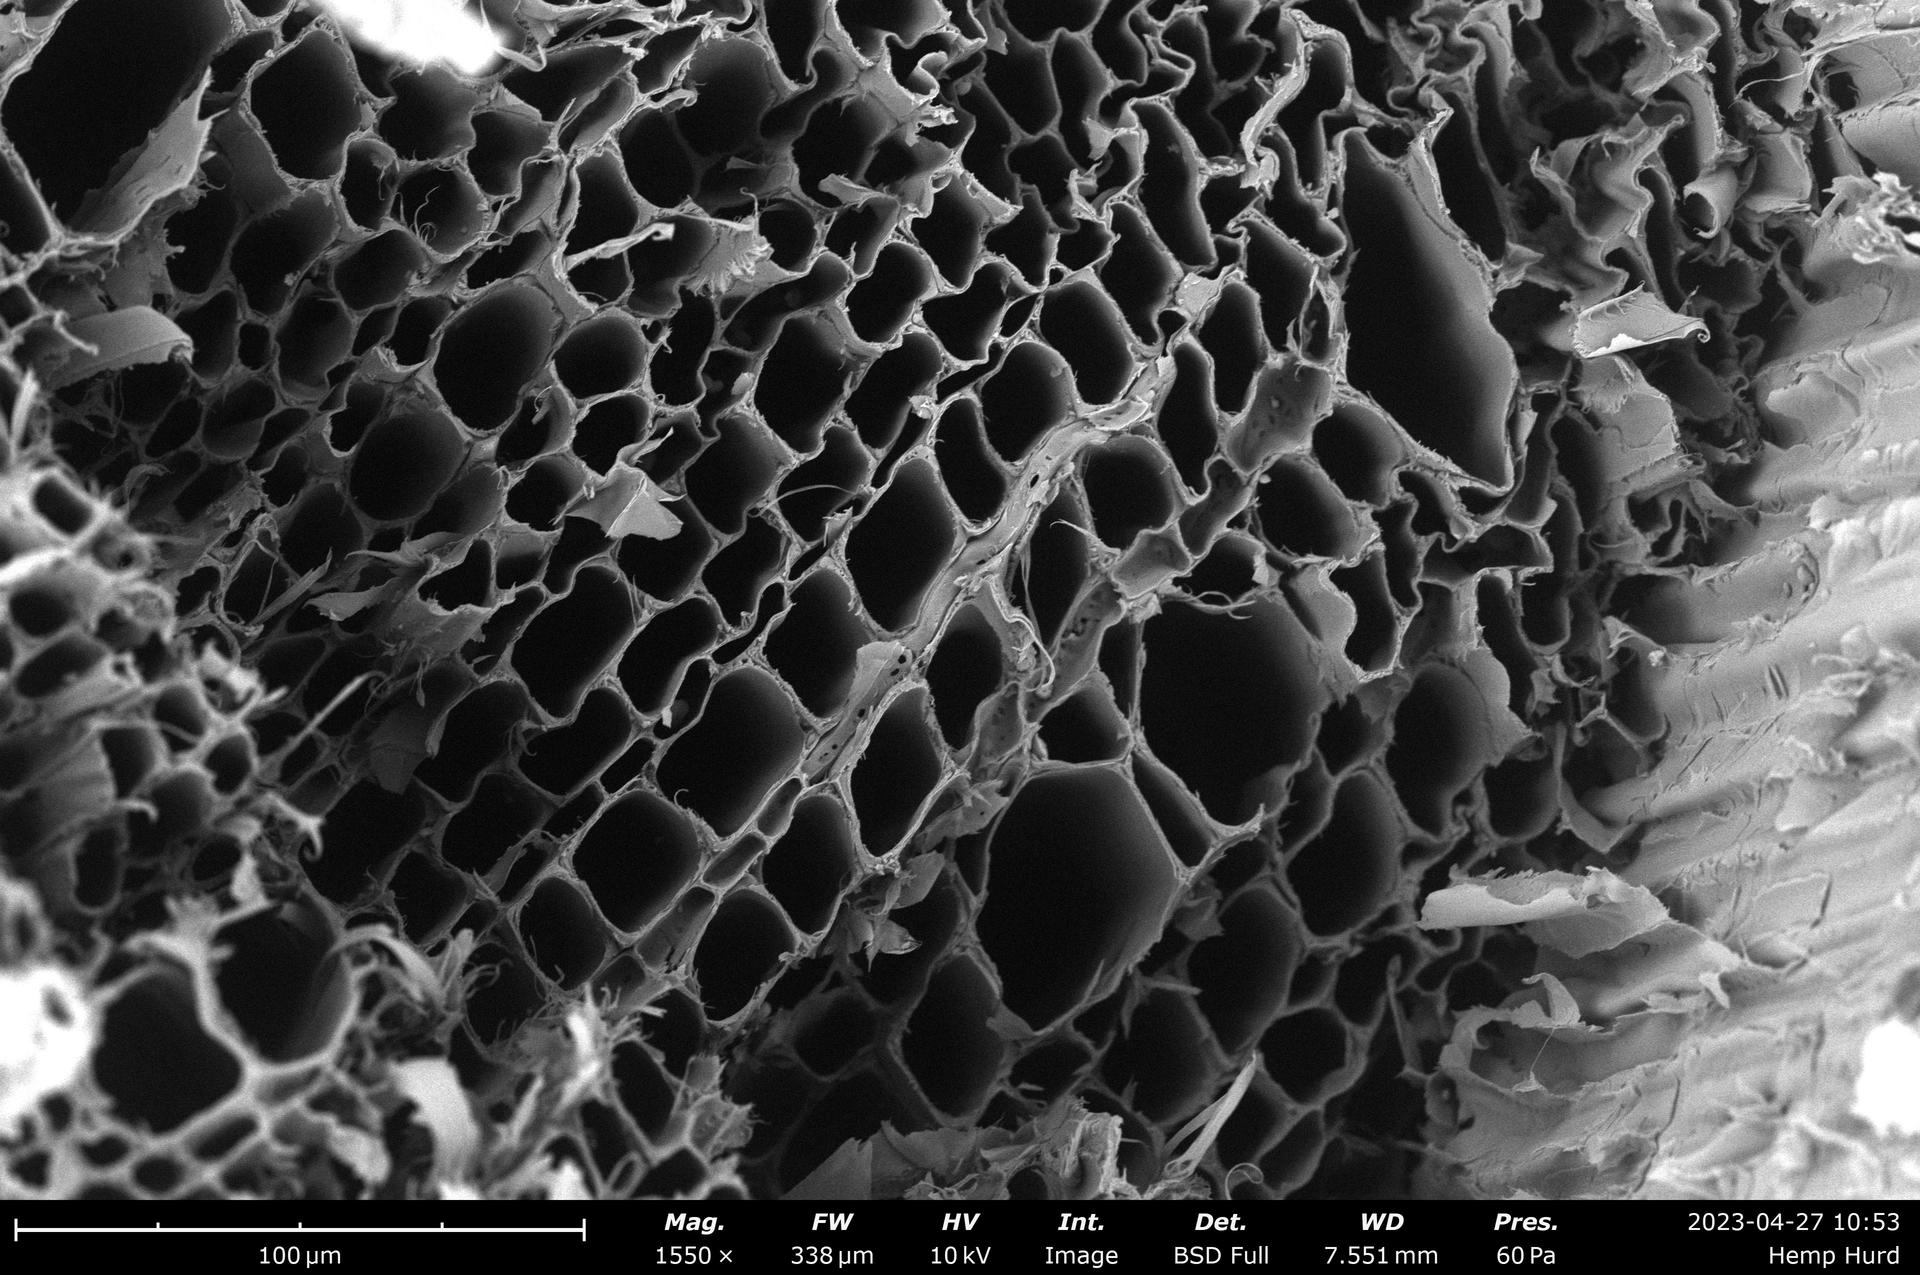 Microstructure of Hemp hurd from which I drew the inspiration for the building block/module.